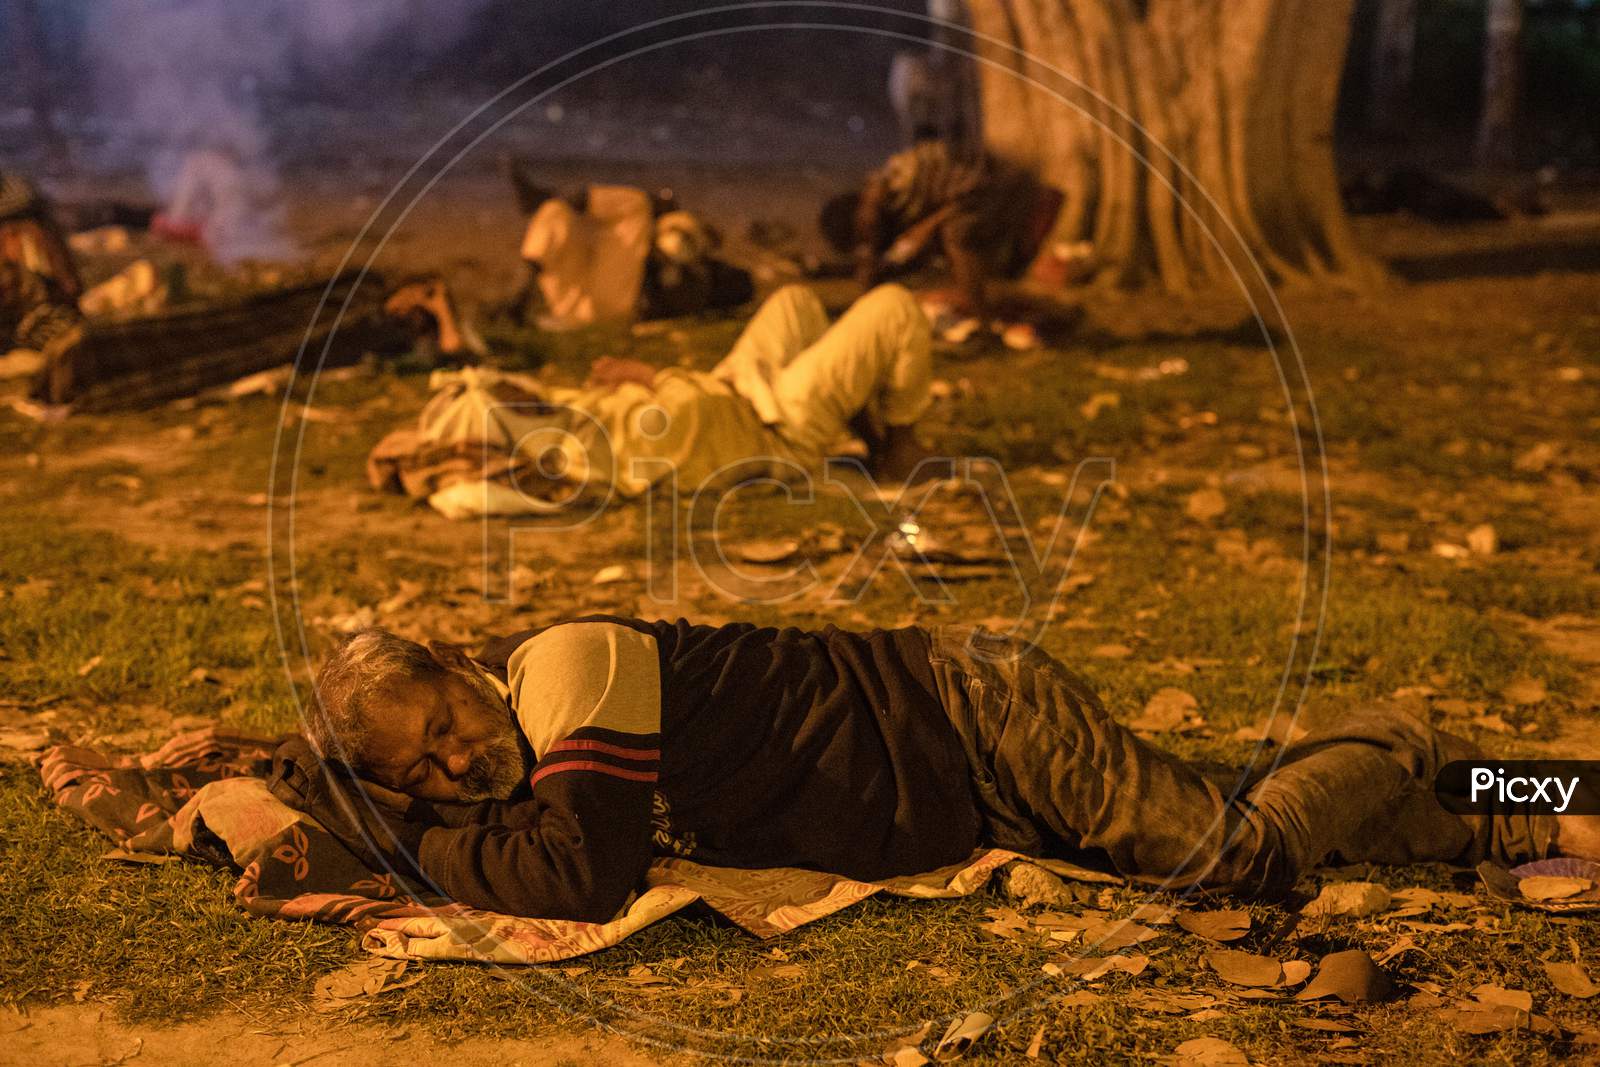 A Homeless Man Wears A Protective Facemask As He Lies Along The Bank Of River Yamuna During A Government Imposed Nationwide Lockdown As A Preventive Measure Against The Covid-19 Corona Virus In New Delhi, India, On April 9, 2020.